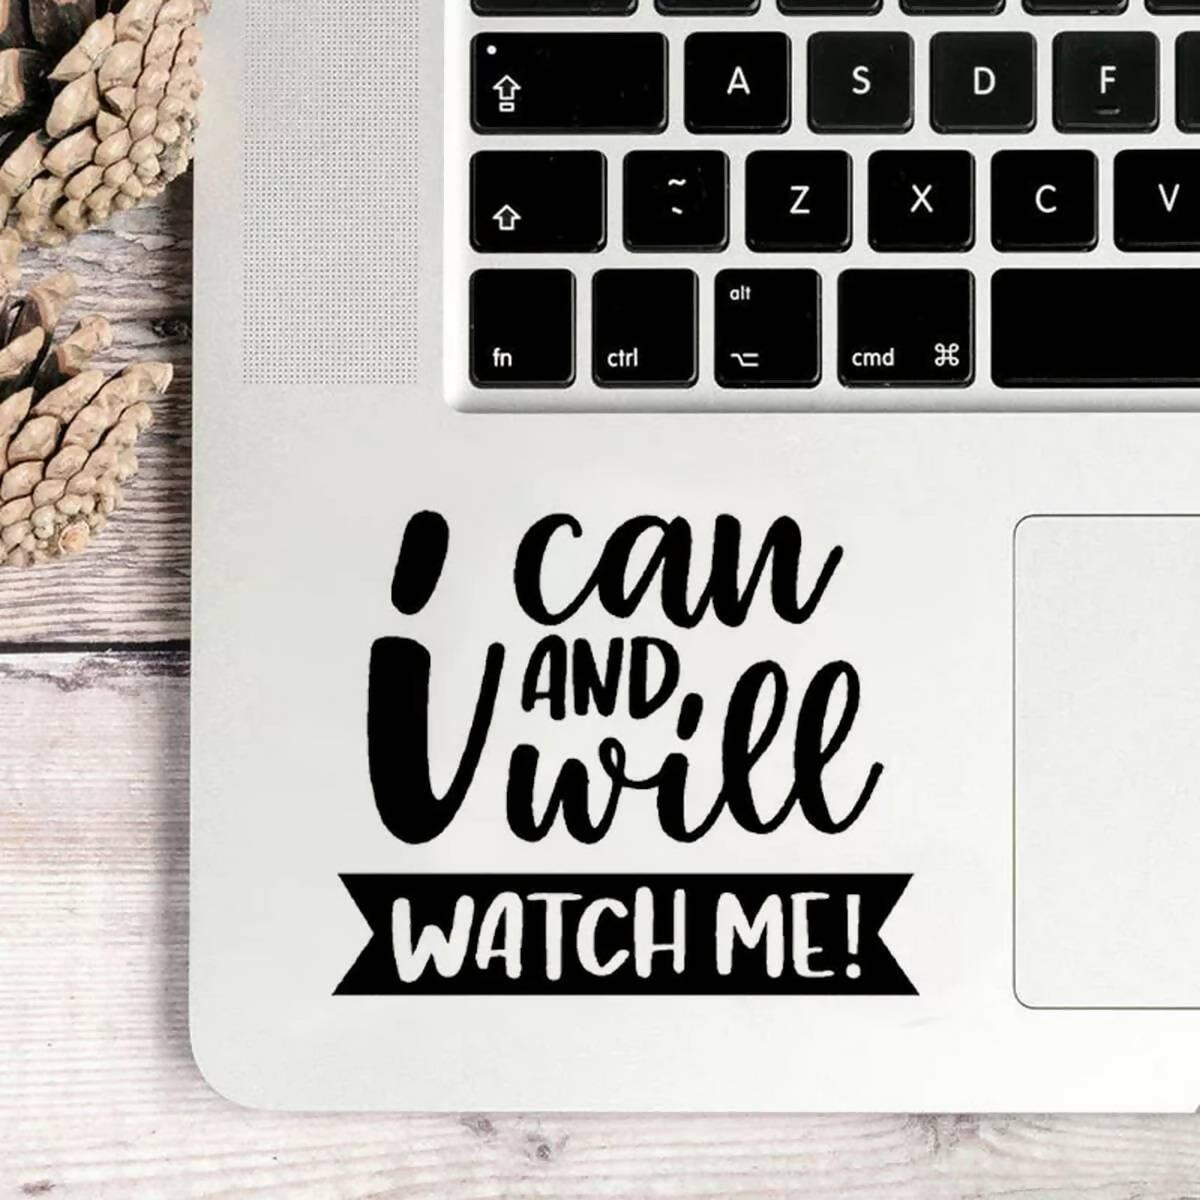 I Can and I Will Watch Me Motivational Laptop Sticker for Girls and Boys Decal New Design, Car Stickers, Wall Stickers High Quality Vinyl Stickers by Sticker Studio